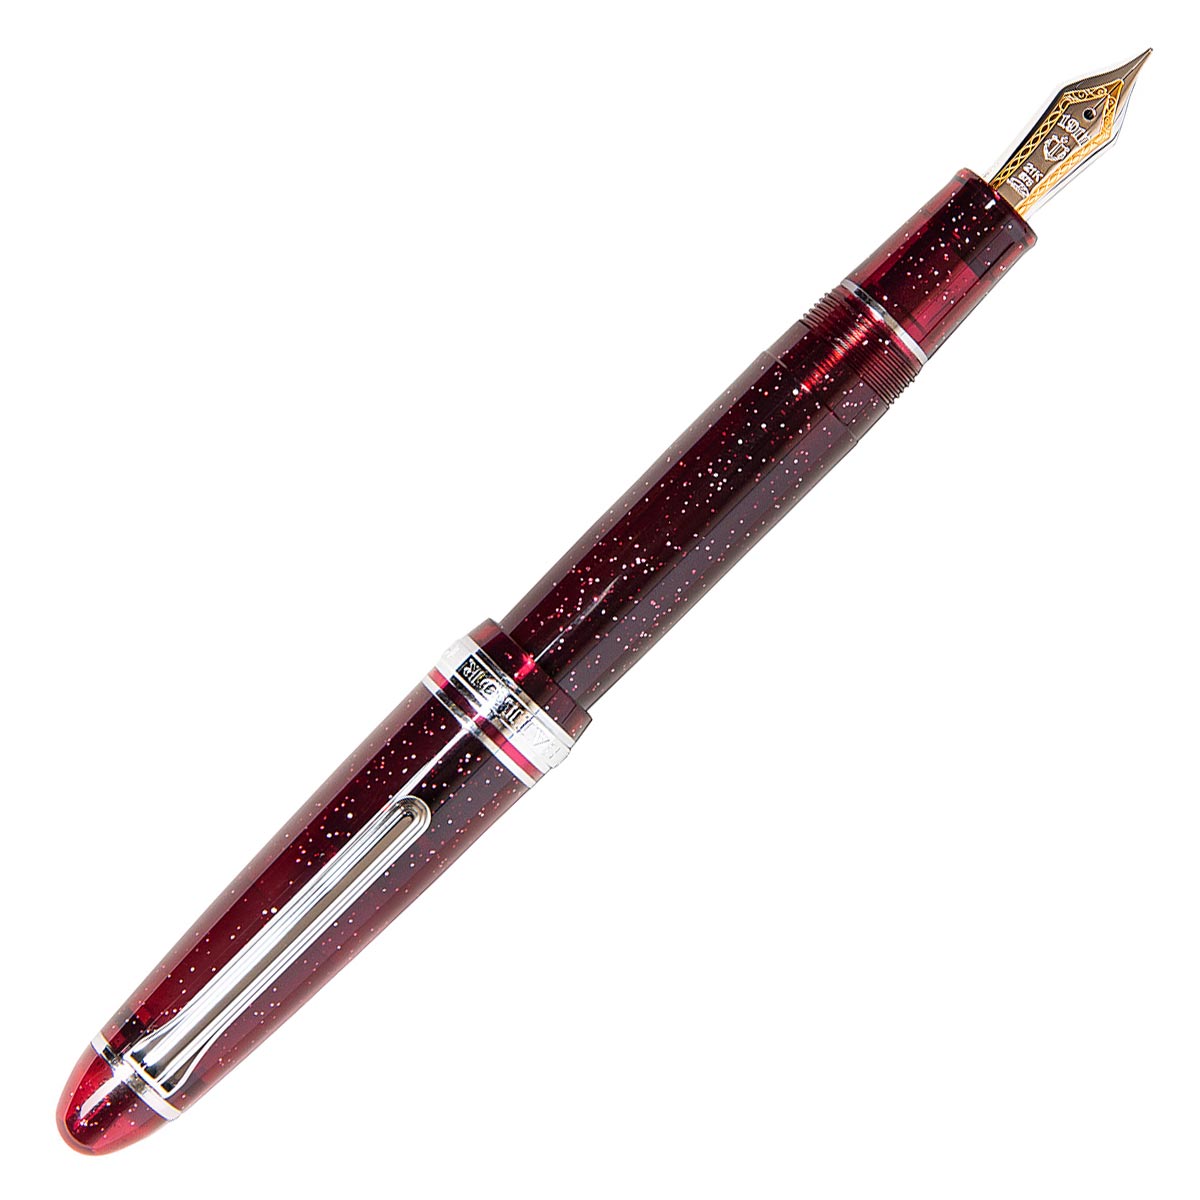 Sailor 1911 Large Fountain Pen US Exclusive Pen of the Year 2021